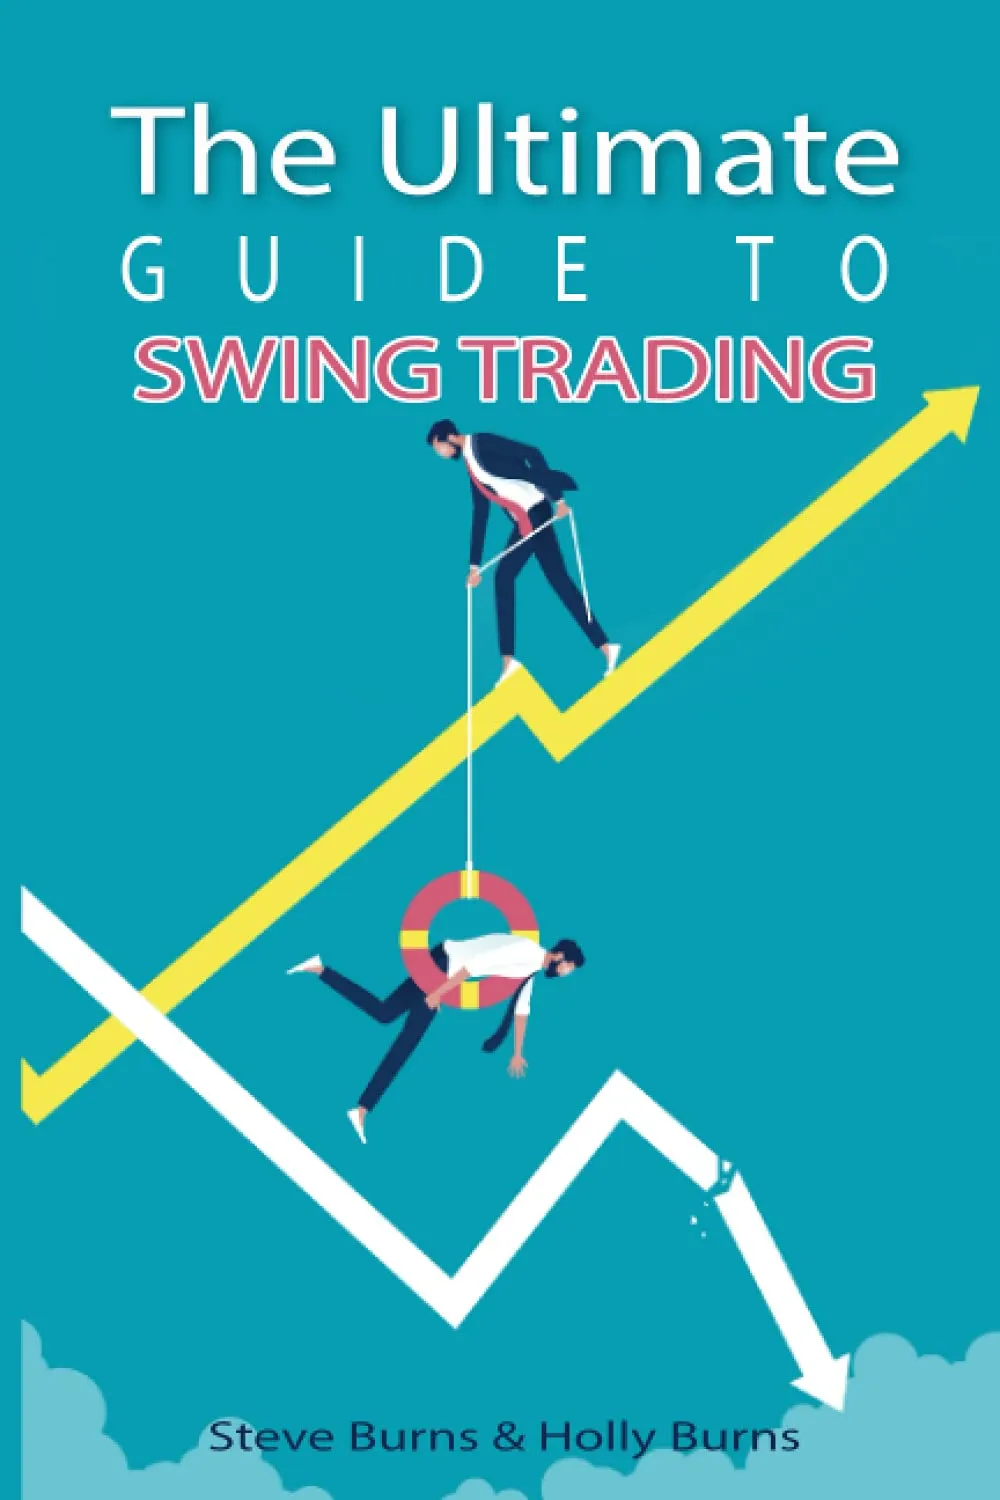 5 Game-Changing Books Every Swing Trader Should Read